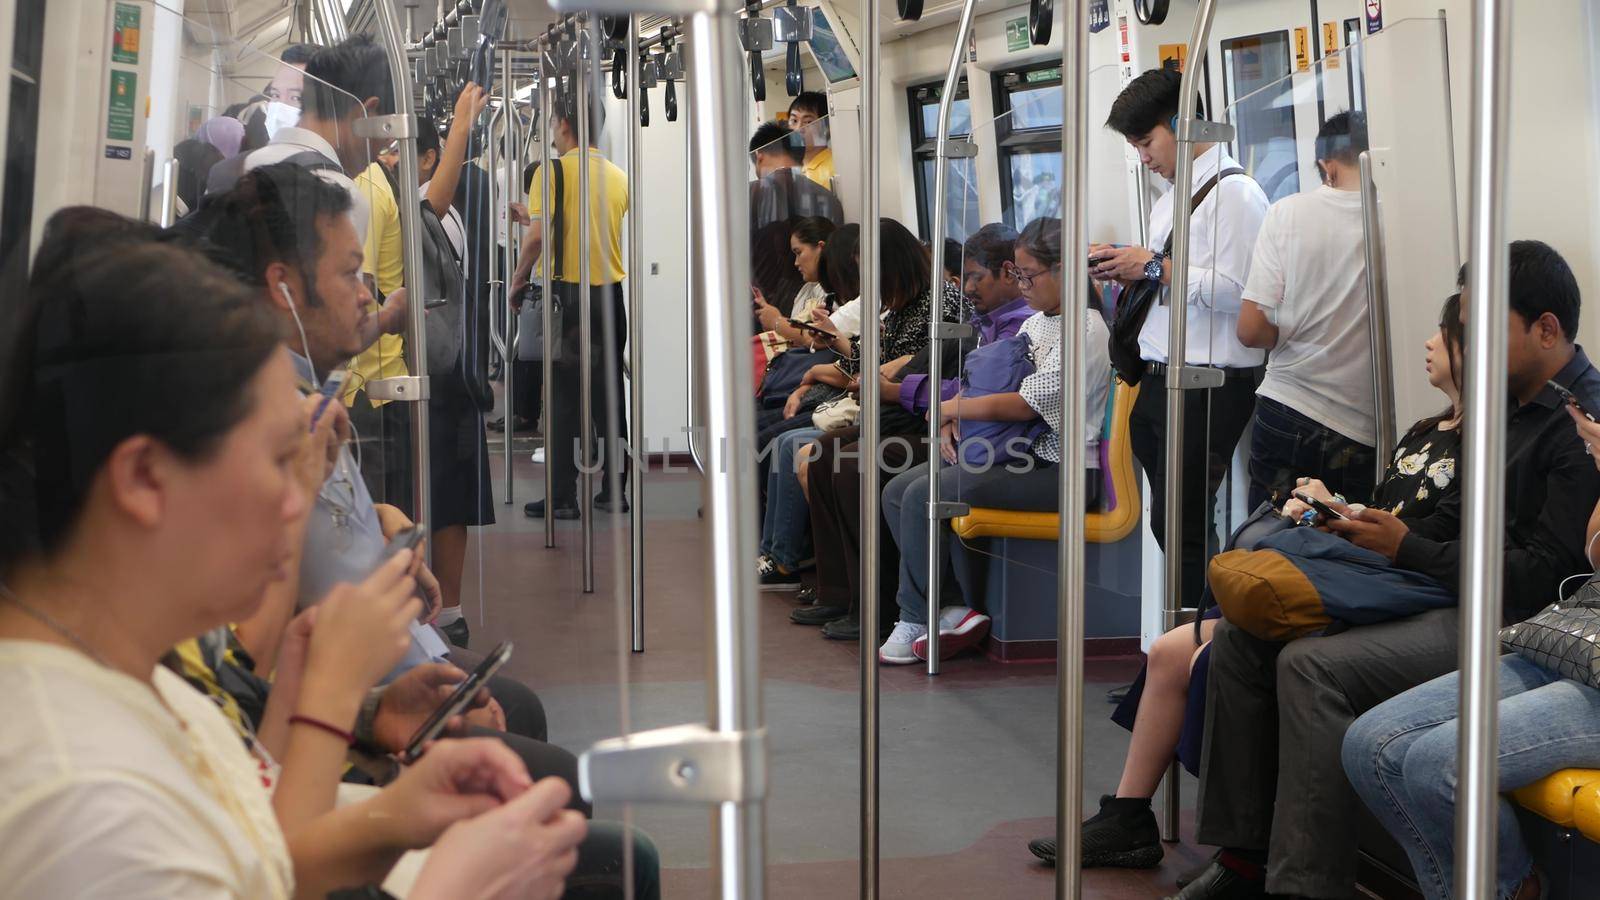 BANGKOK, THAILAND - 10 JULY, 2019: Asian passengers in train using smartphones. Thai people online surfing internet in bts car. Public transportation. Addiction from social media and phone in subway. by DogoraSun